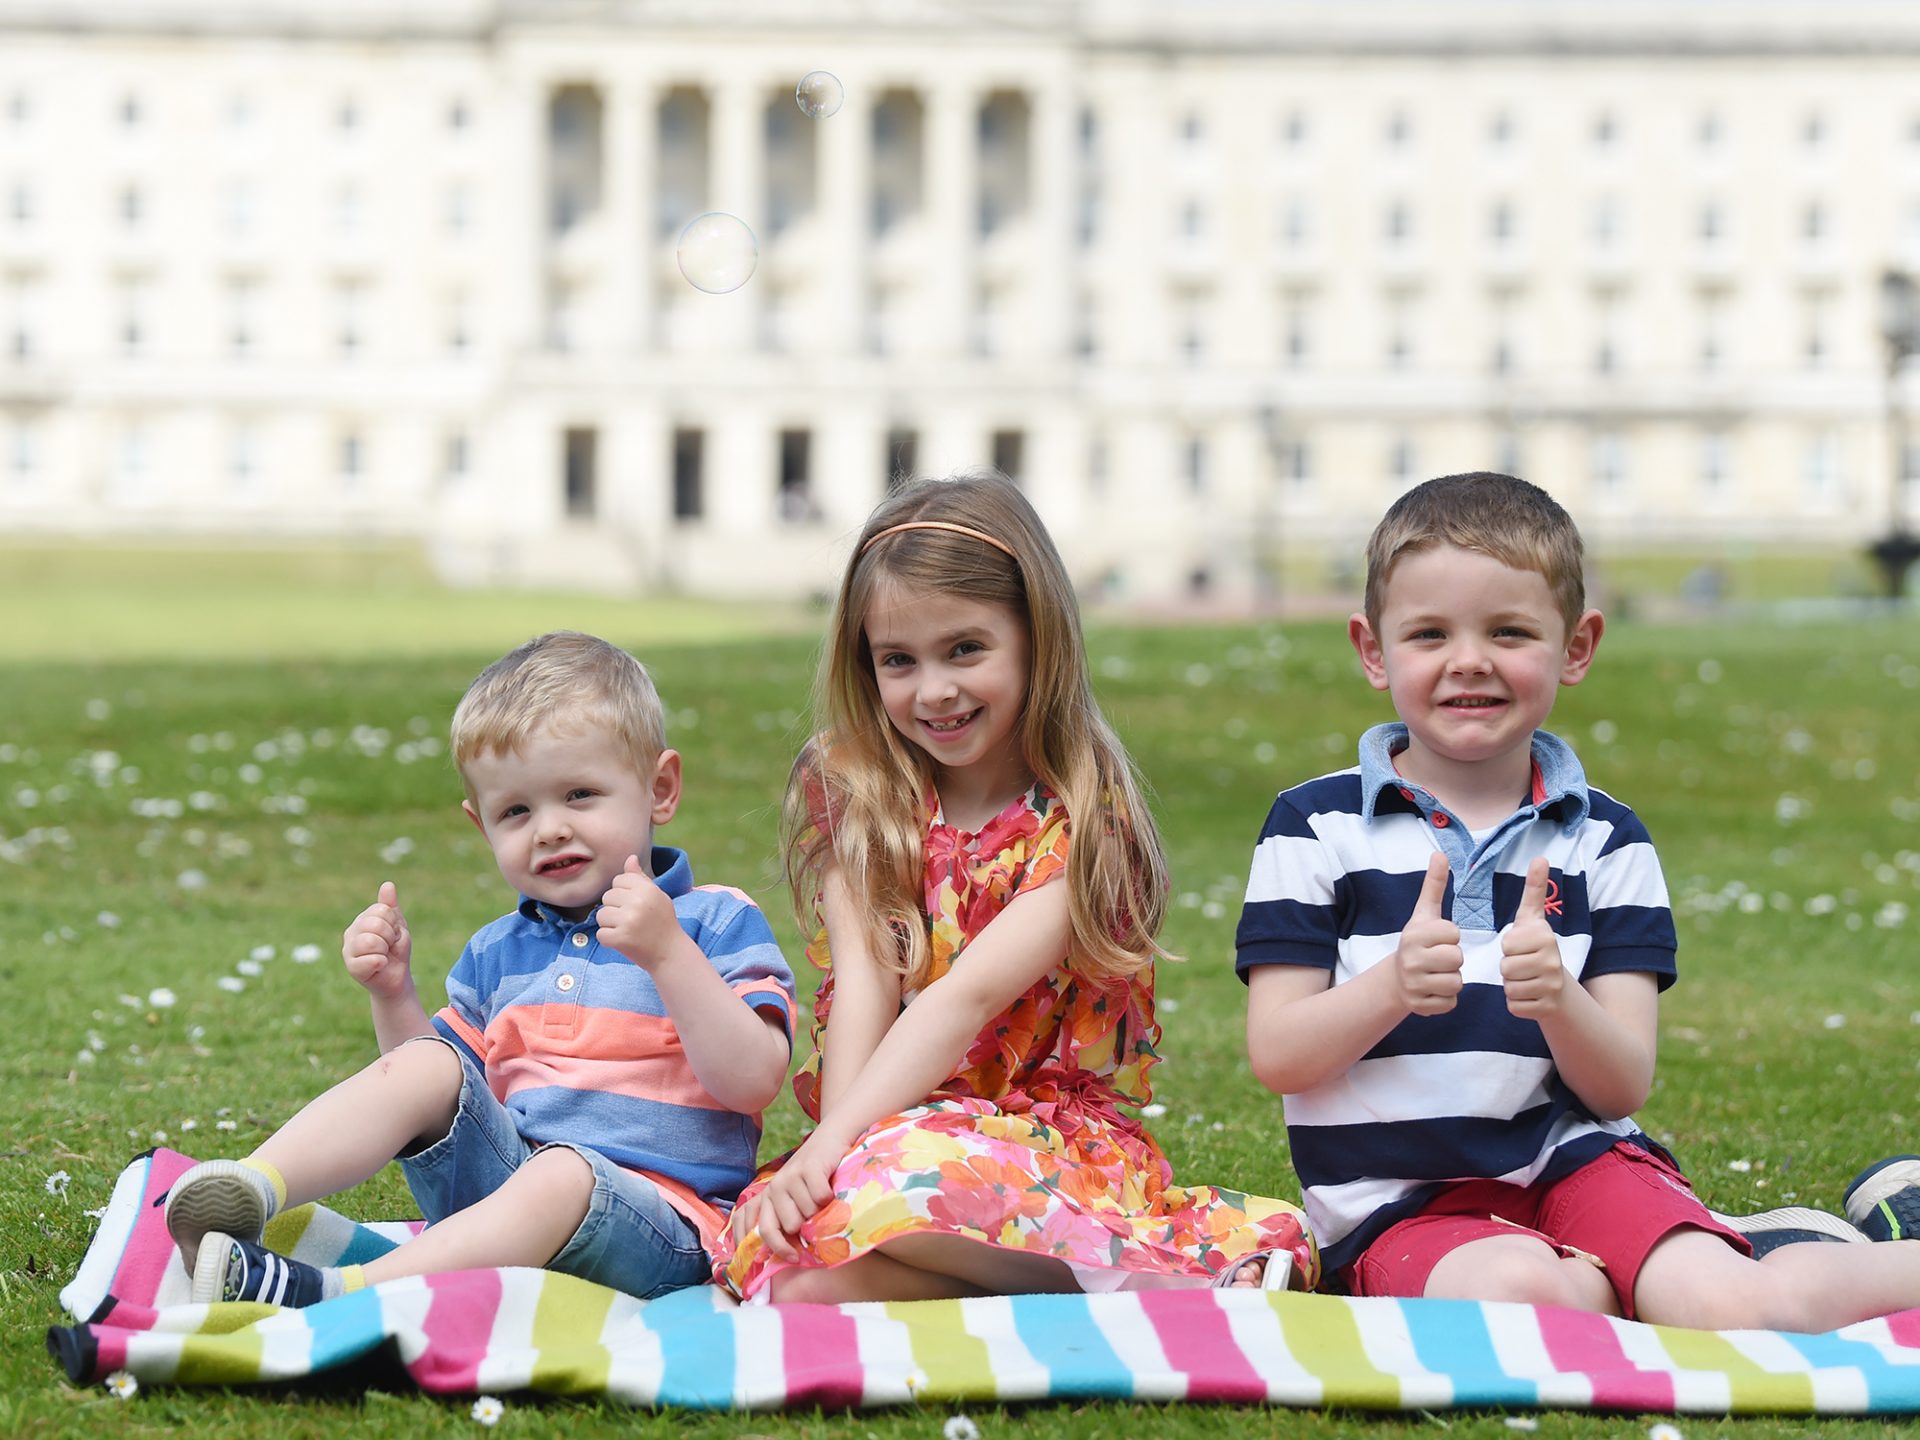 Executive must deliver immediate support to struggling families and childcare sector as well as long-term investment through new Childcare Strategy